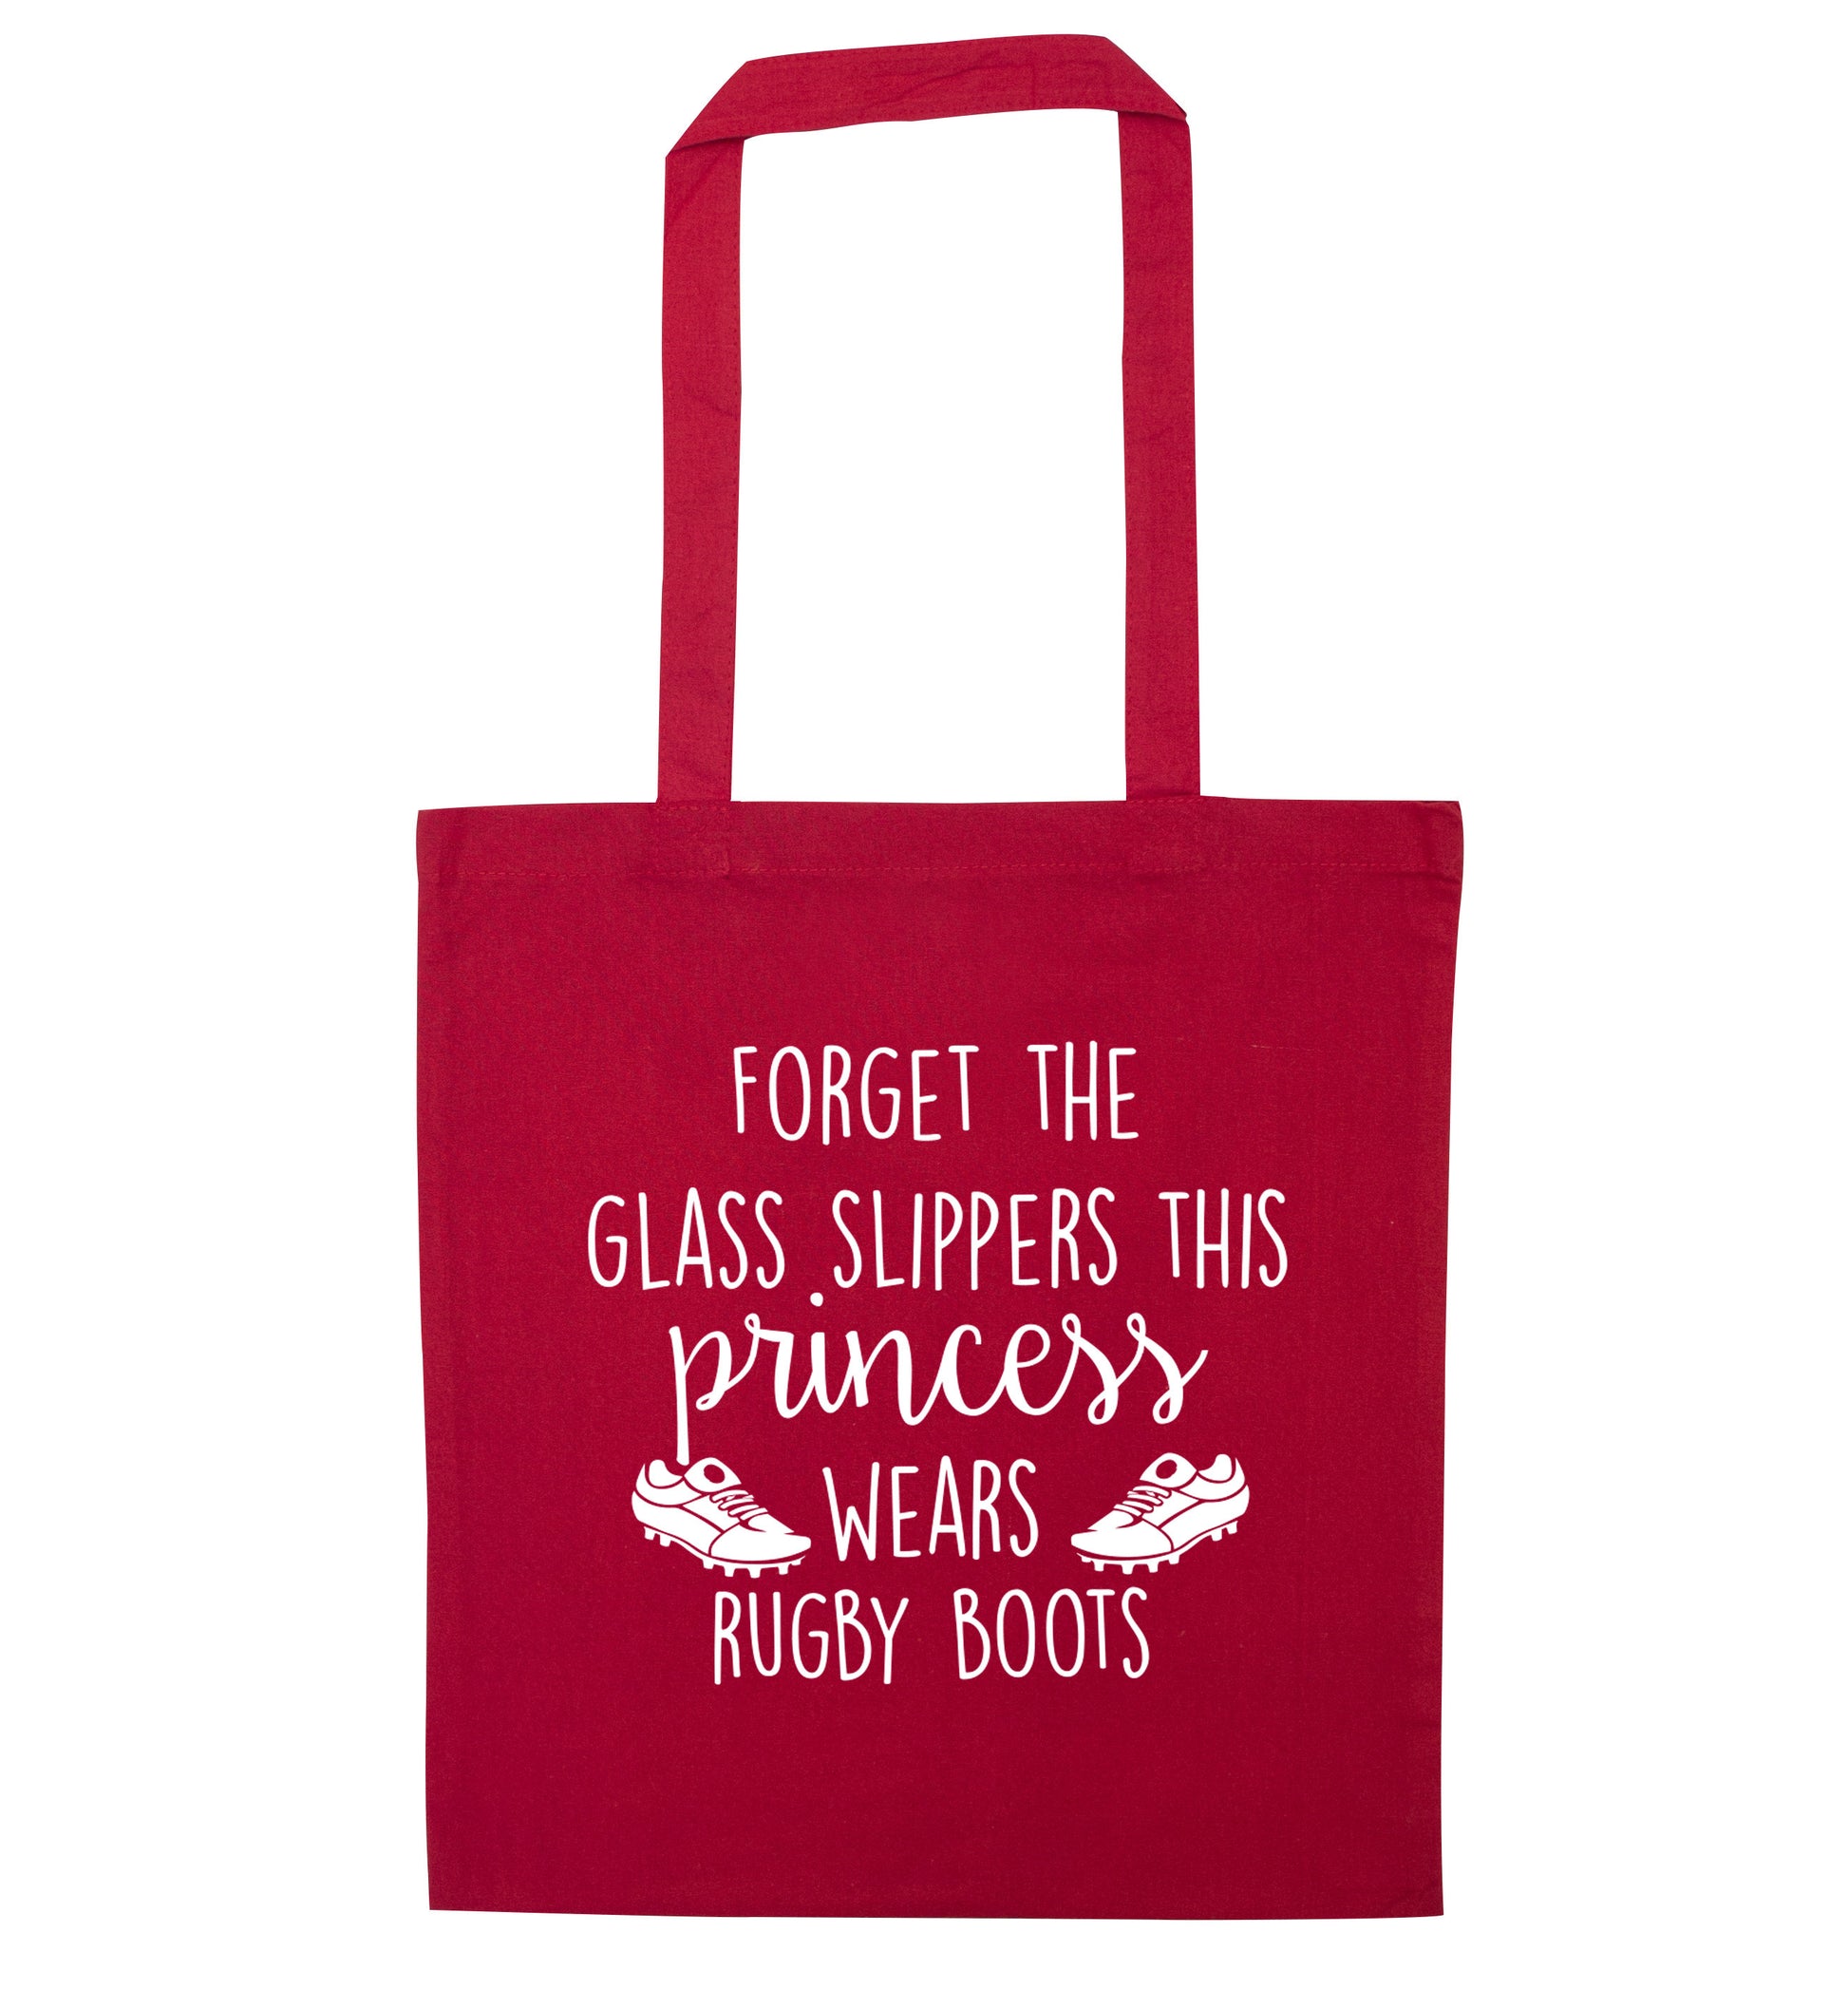 Forget the glass slippers this princess wears rugby boots red tote bag